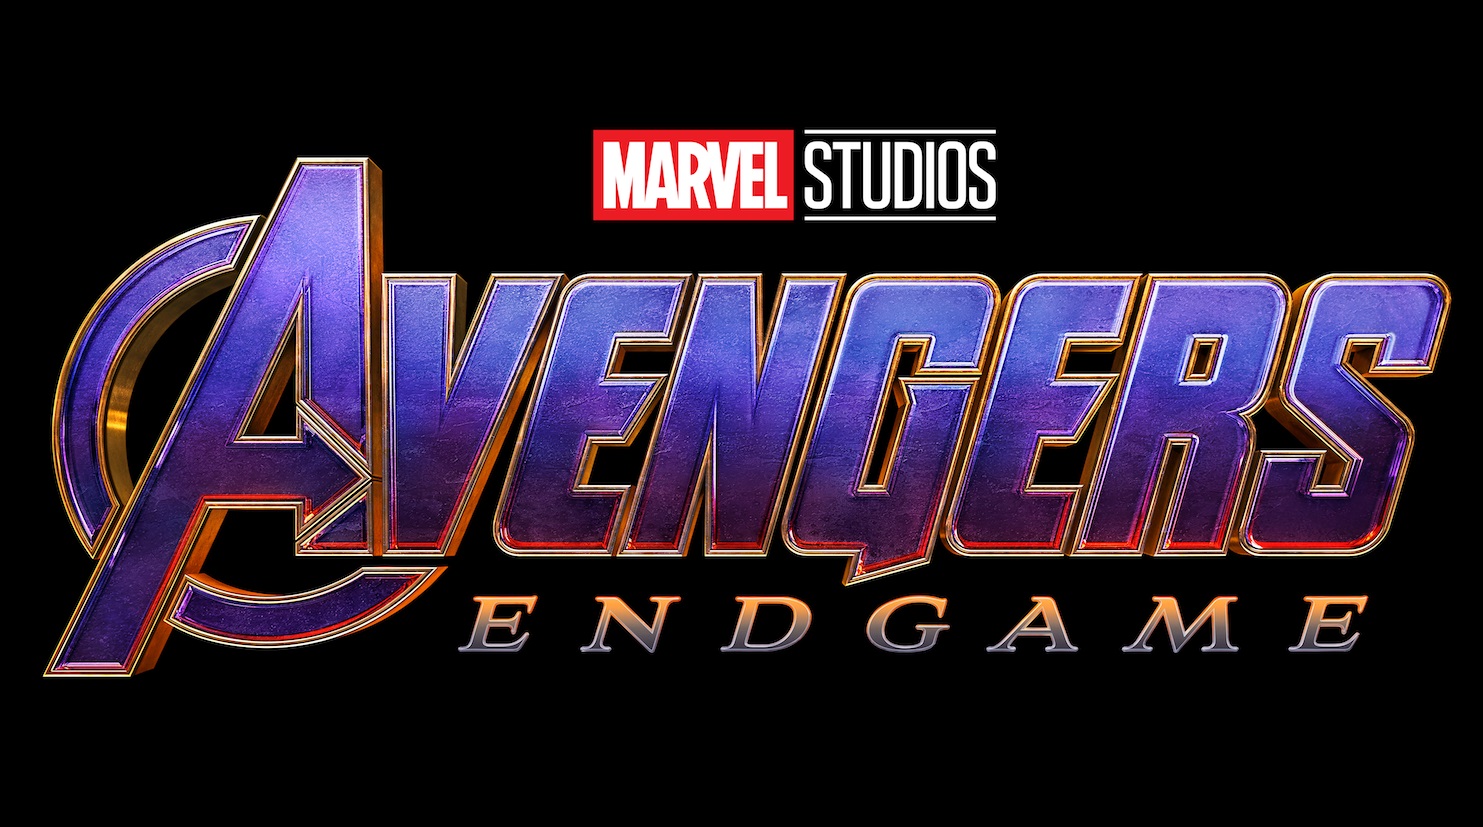 title in avengers font